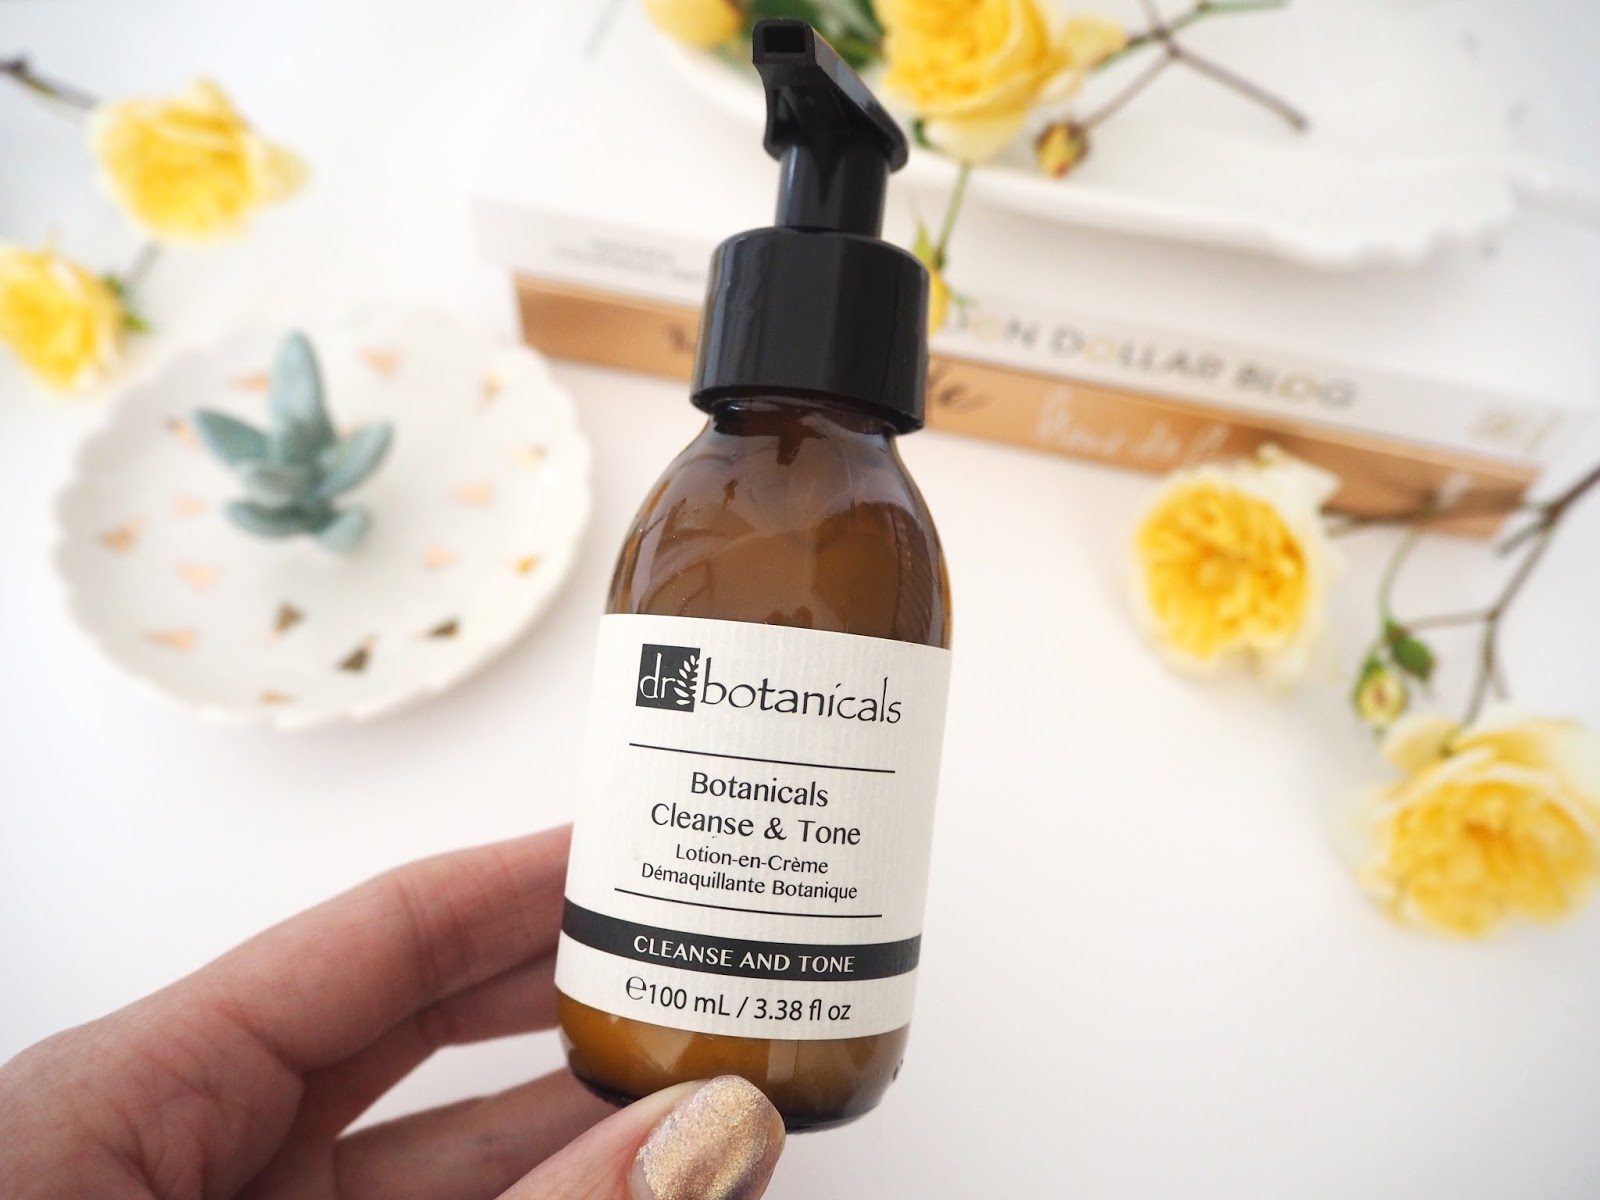 Dr Botanicals Cleanse & Tone 2-in-1 Cleanser, Katie Kirk Loves, Beauty Blogger, Dr Botanicals Skincare, UK Blogger, Skincare Review, Discount Code, Skincare Routine, Luxury Skincare Products, Facial Cleanser